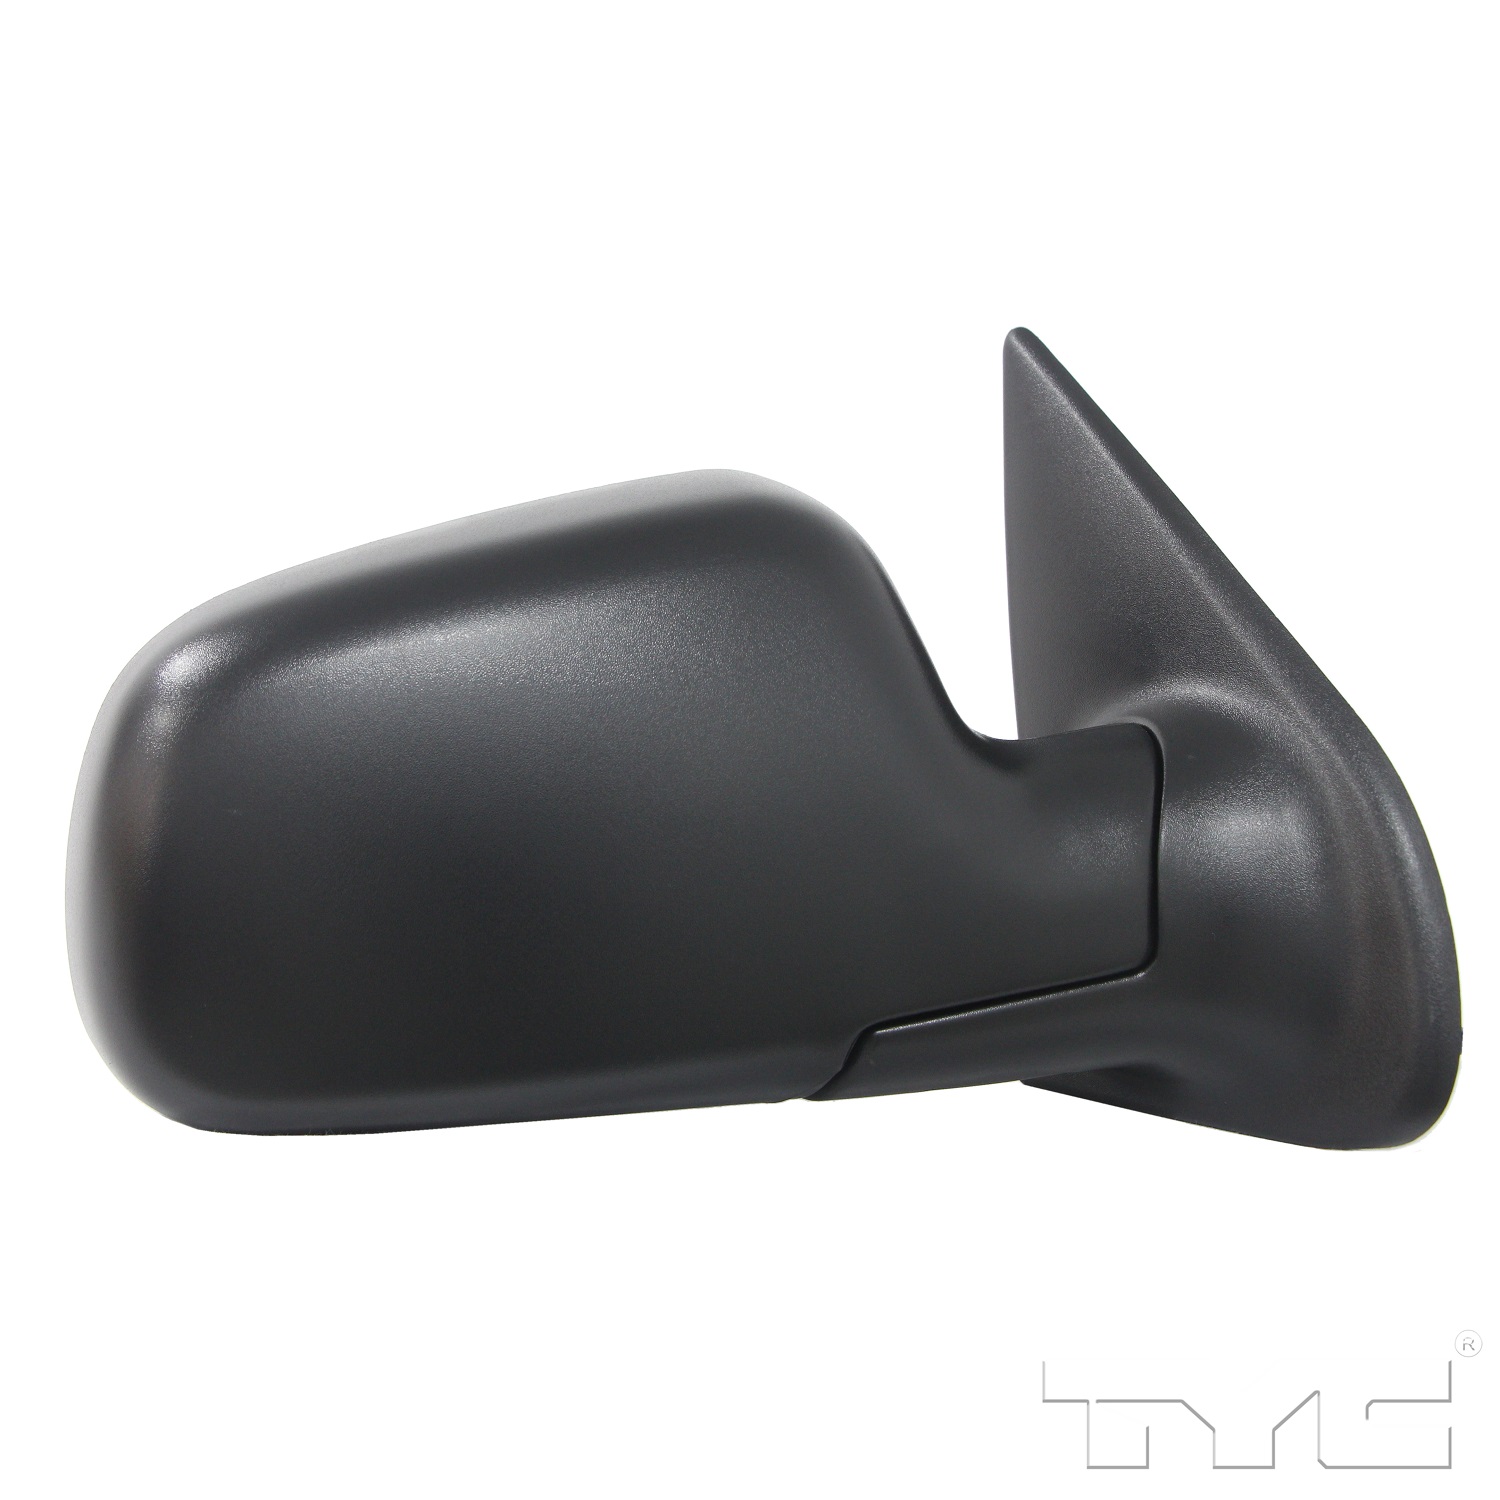 Aftermarket MIRRORS for JEEP - GRAND CHEROKEE, GRAND CHEROKEE,99-04,RT Mirror outside rear view